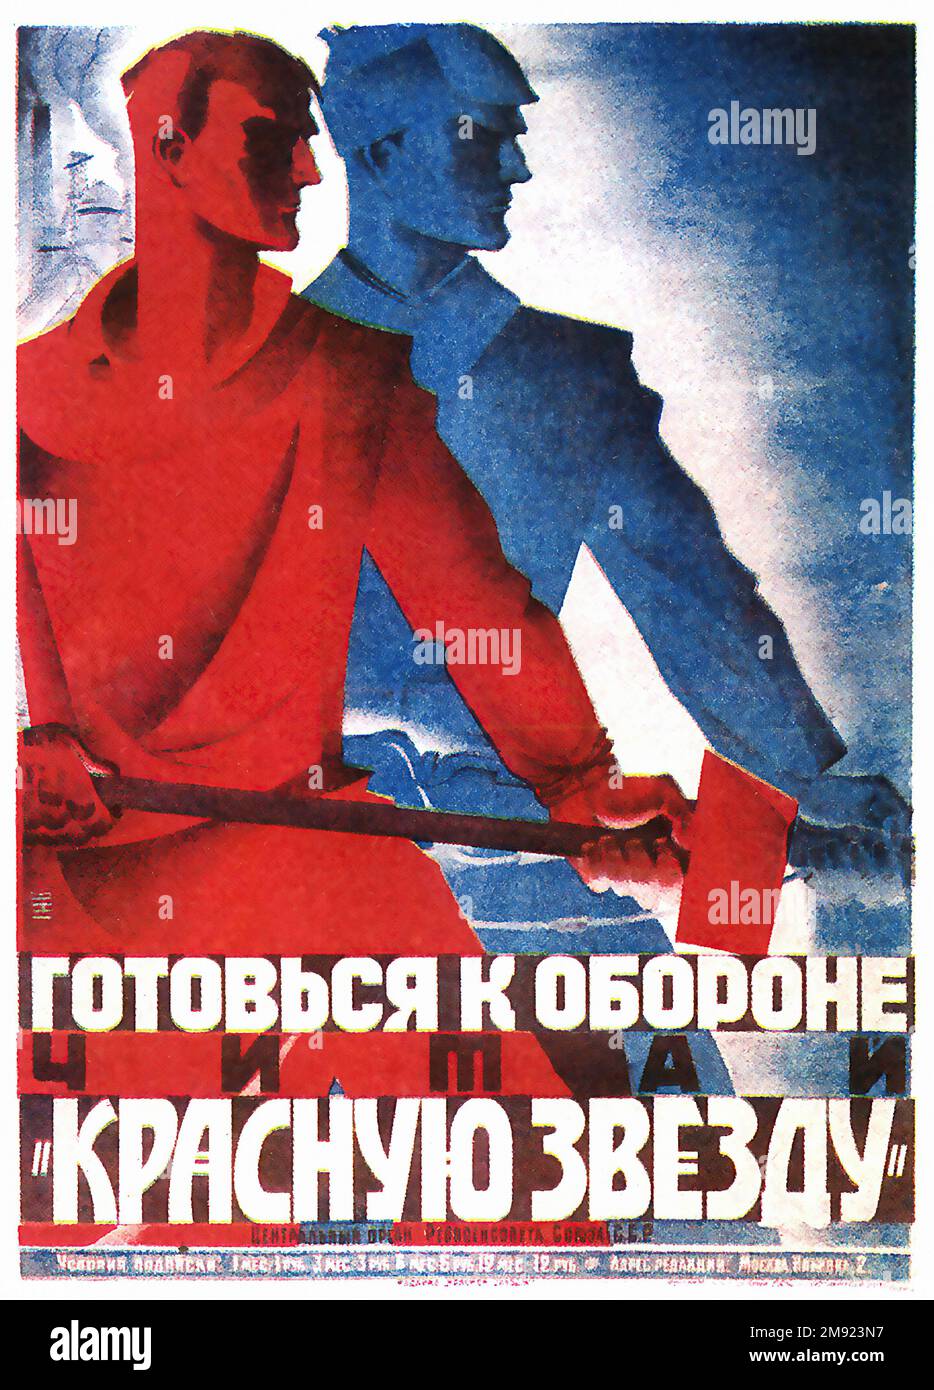 Be Ready To Defend Your Motherland!   (Translated from Russian) - Vintage USSR soviet propaganda poster Stock Photo